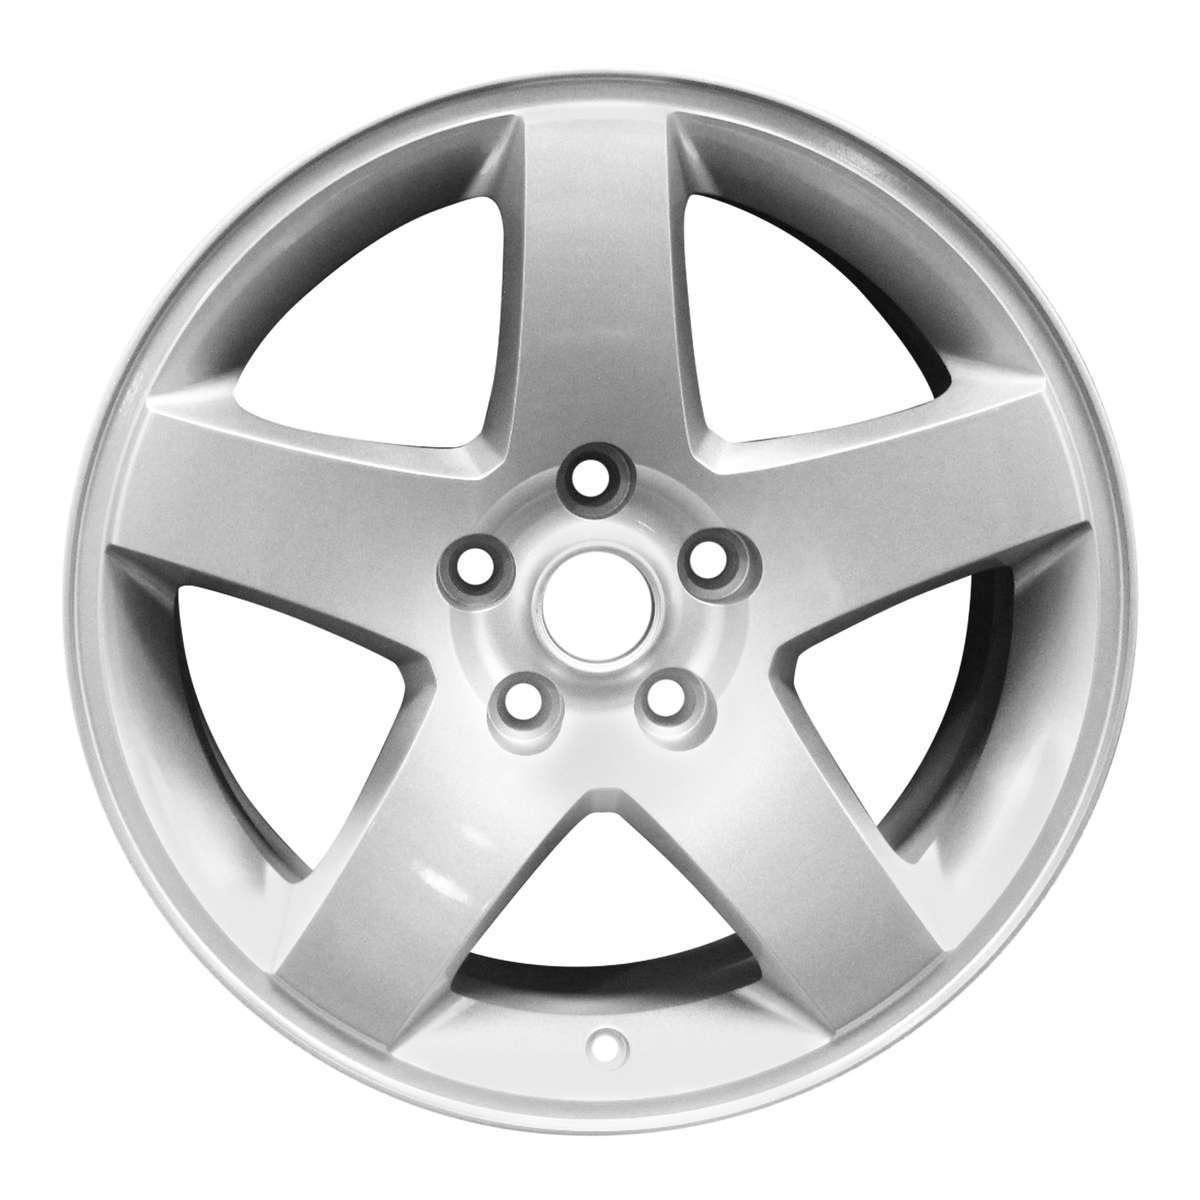 2010 Dodge Charger New 17" Replacement Wheel Rim RW2325S